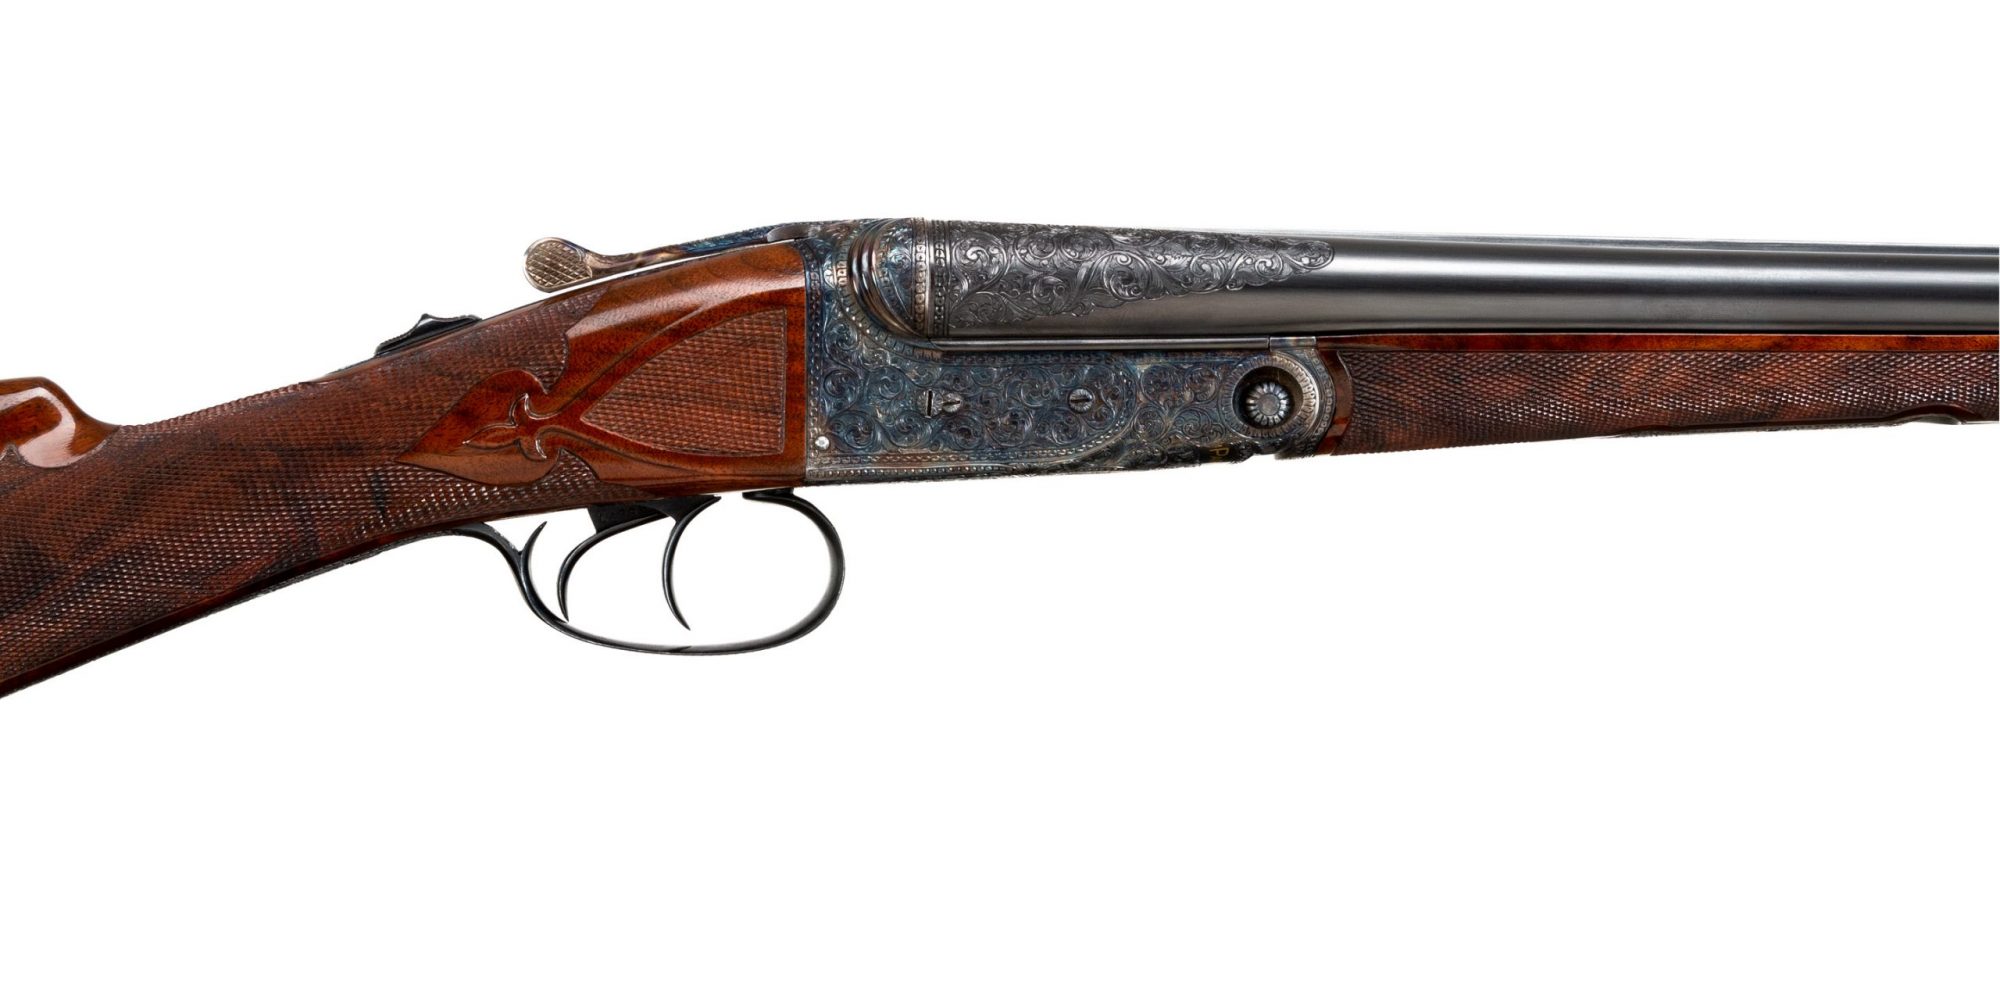 Photo of pre-owned Parker VHE 20 gauge shotgun, upgraded by previous owner to A1 Special. Features color case hardening and other metal finishes by Turnbull Restoration